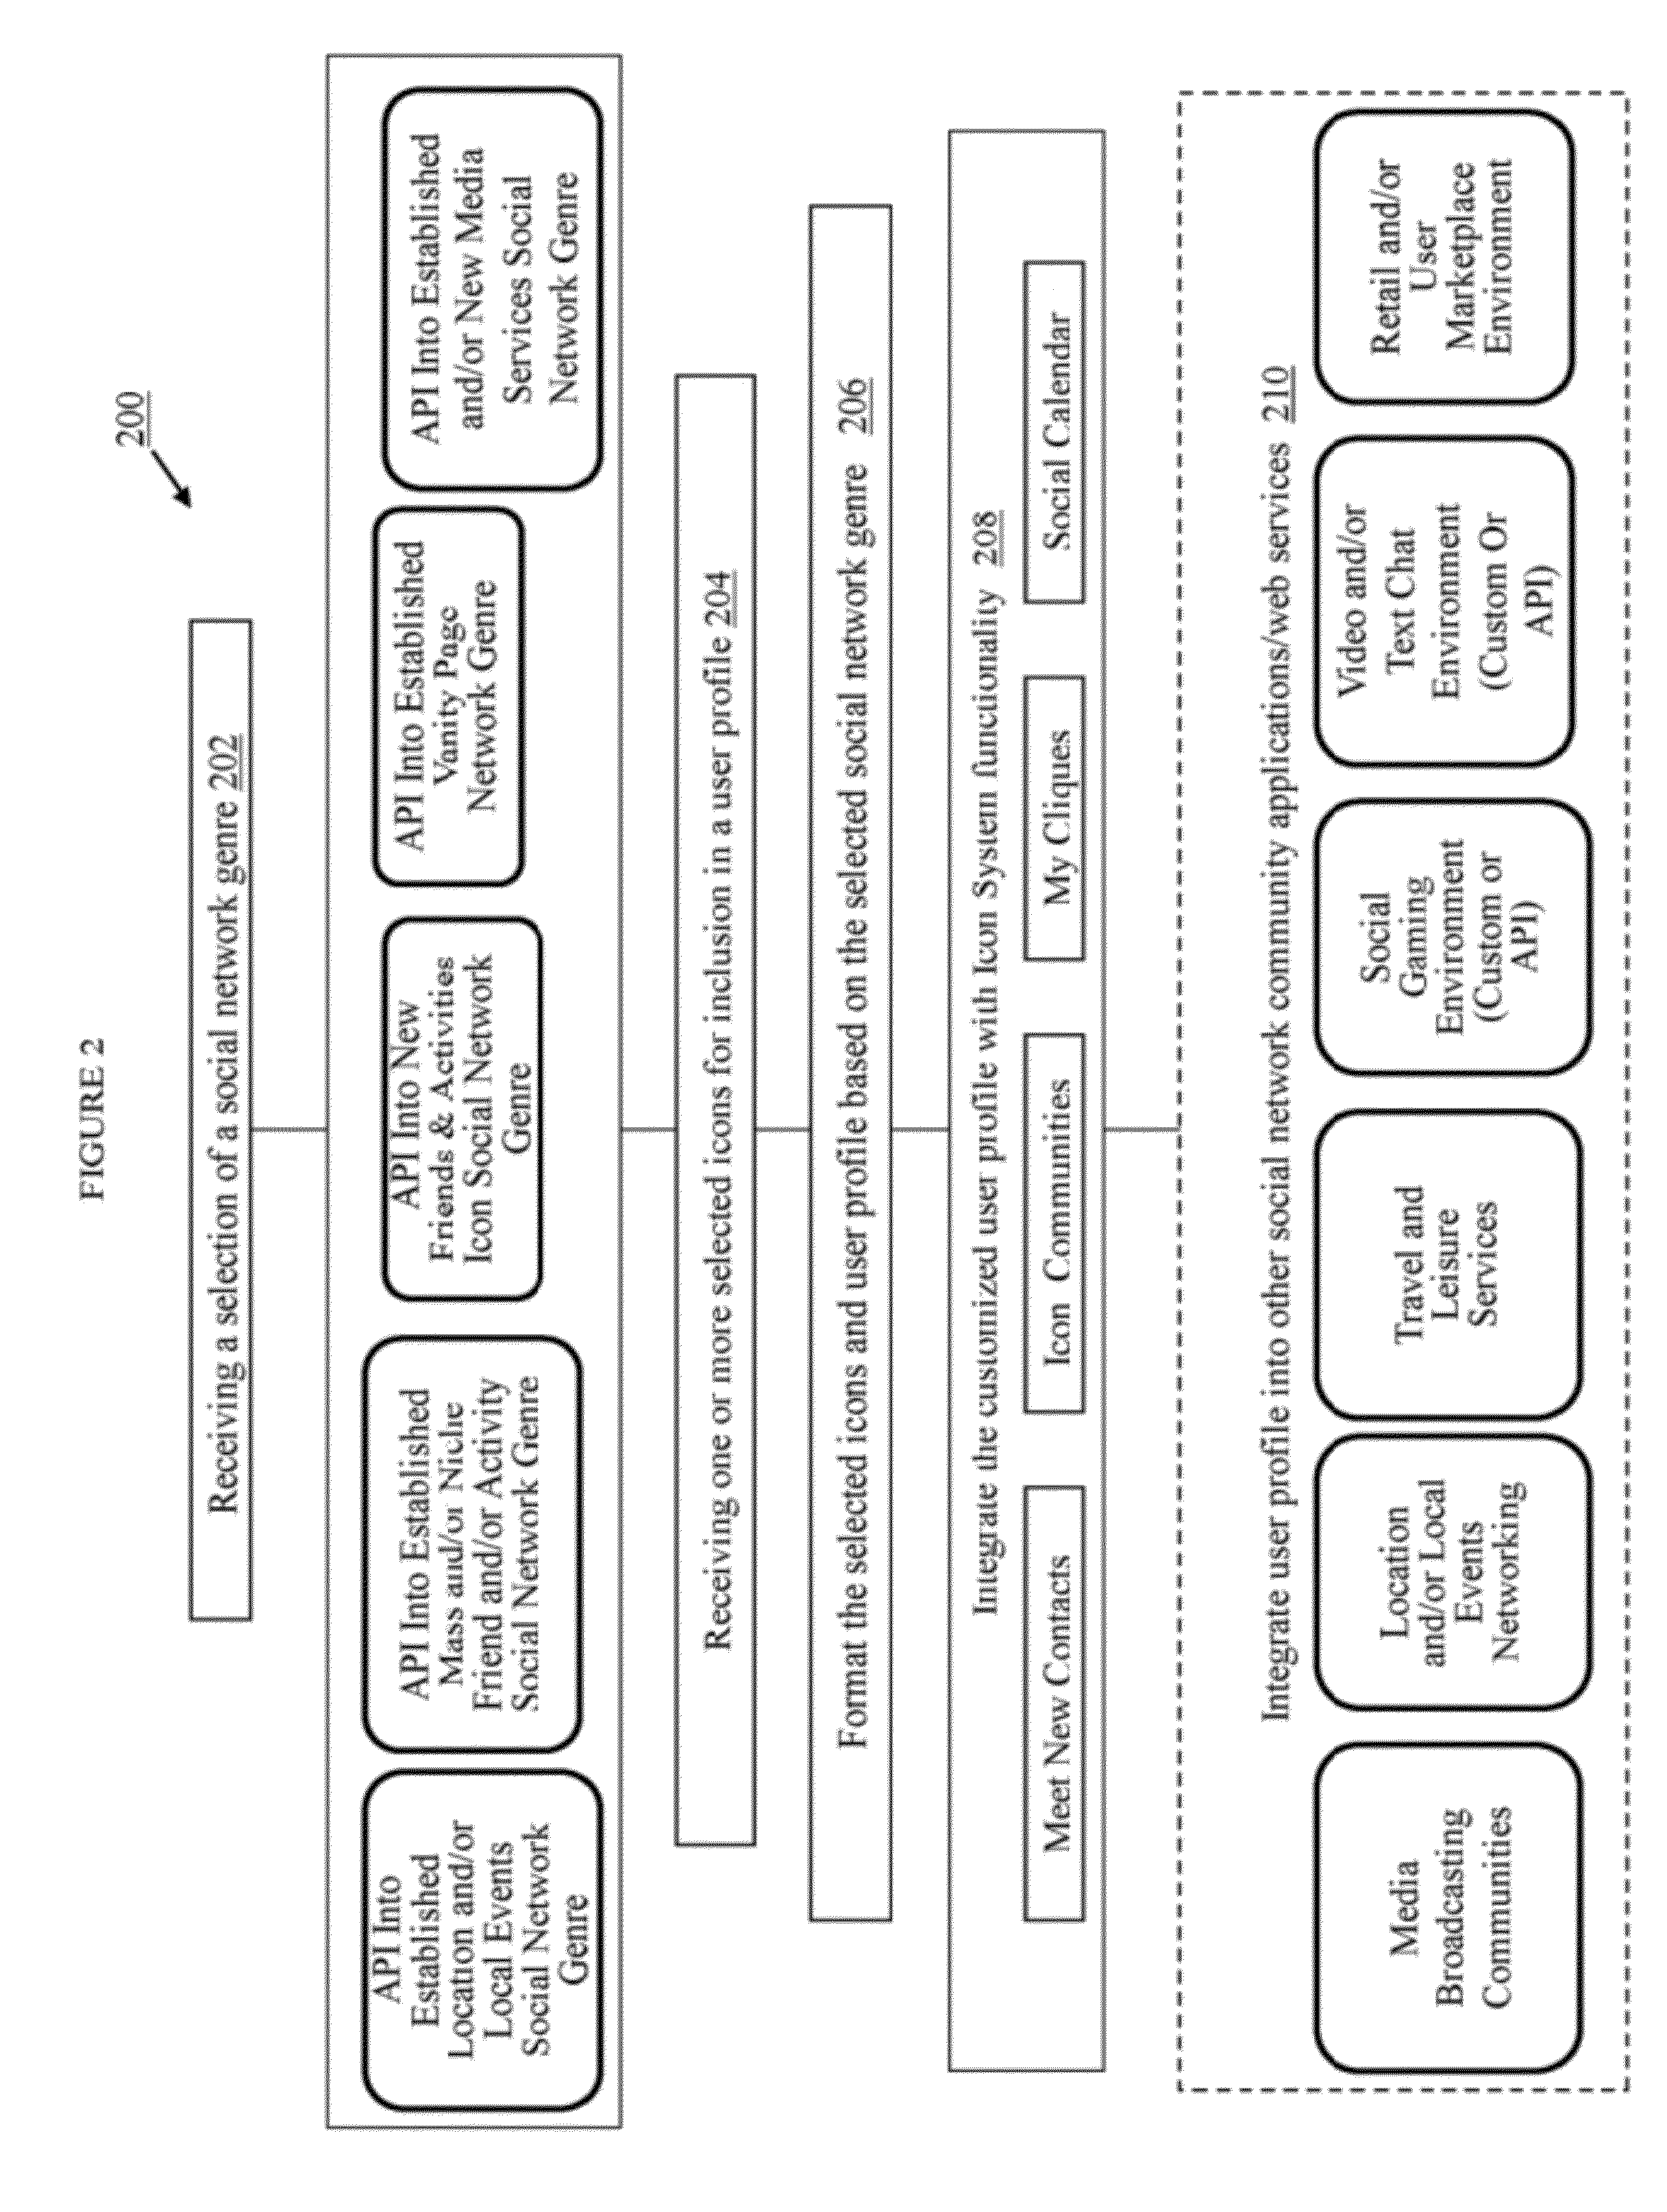 System and method for an interactive mobile-optimized icon-based profile display and associated social network functionality